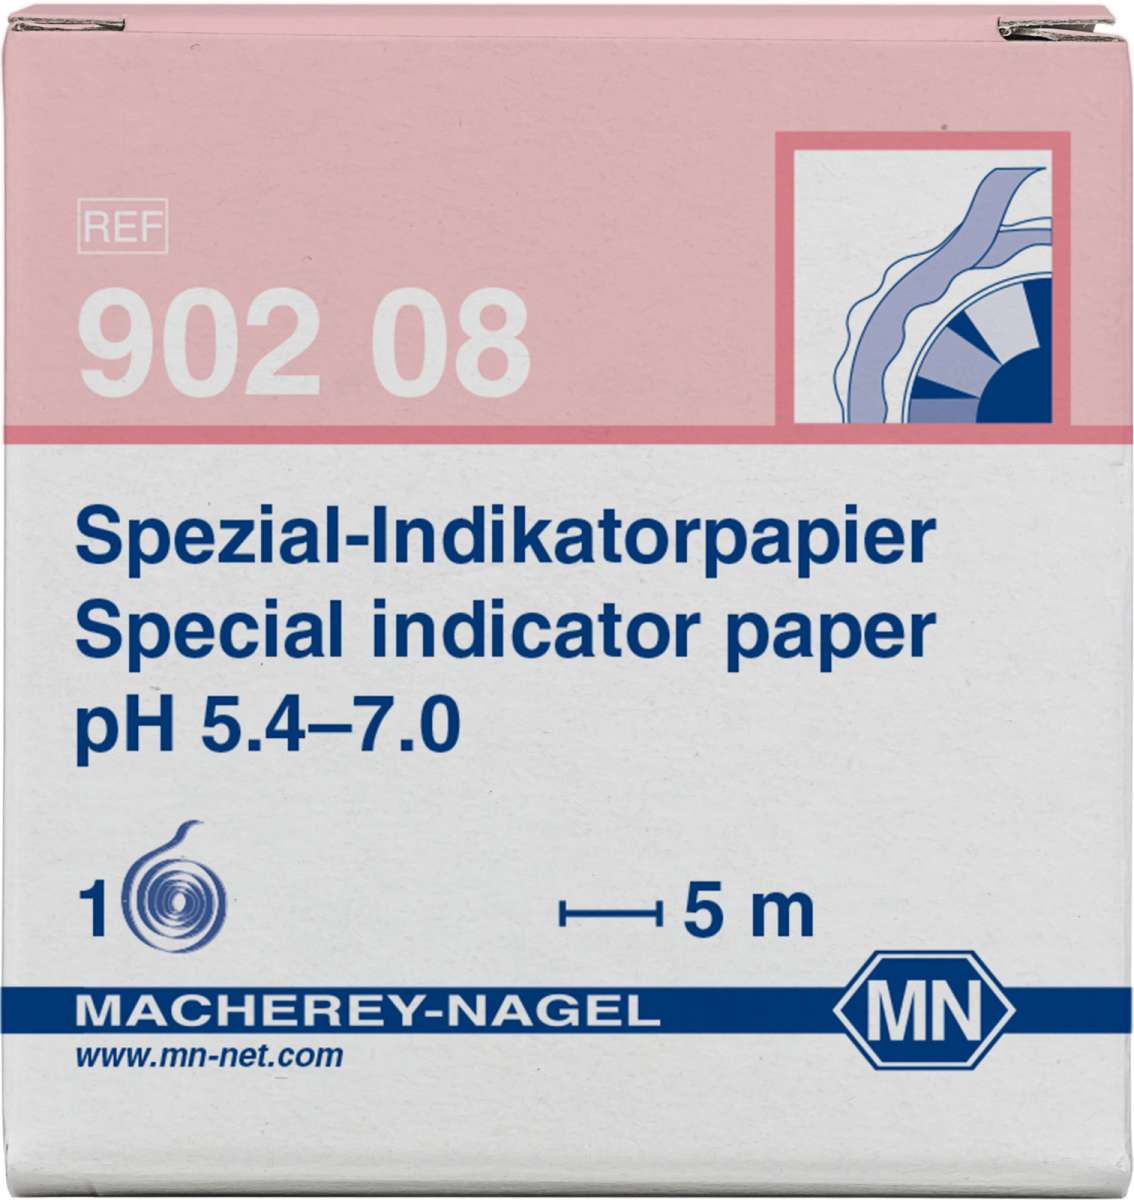 Special indicator paper pH 5.4 to 7.0 (Reel of 5m length and 7mm width)